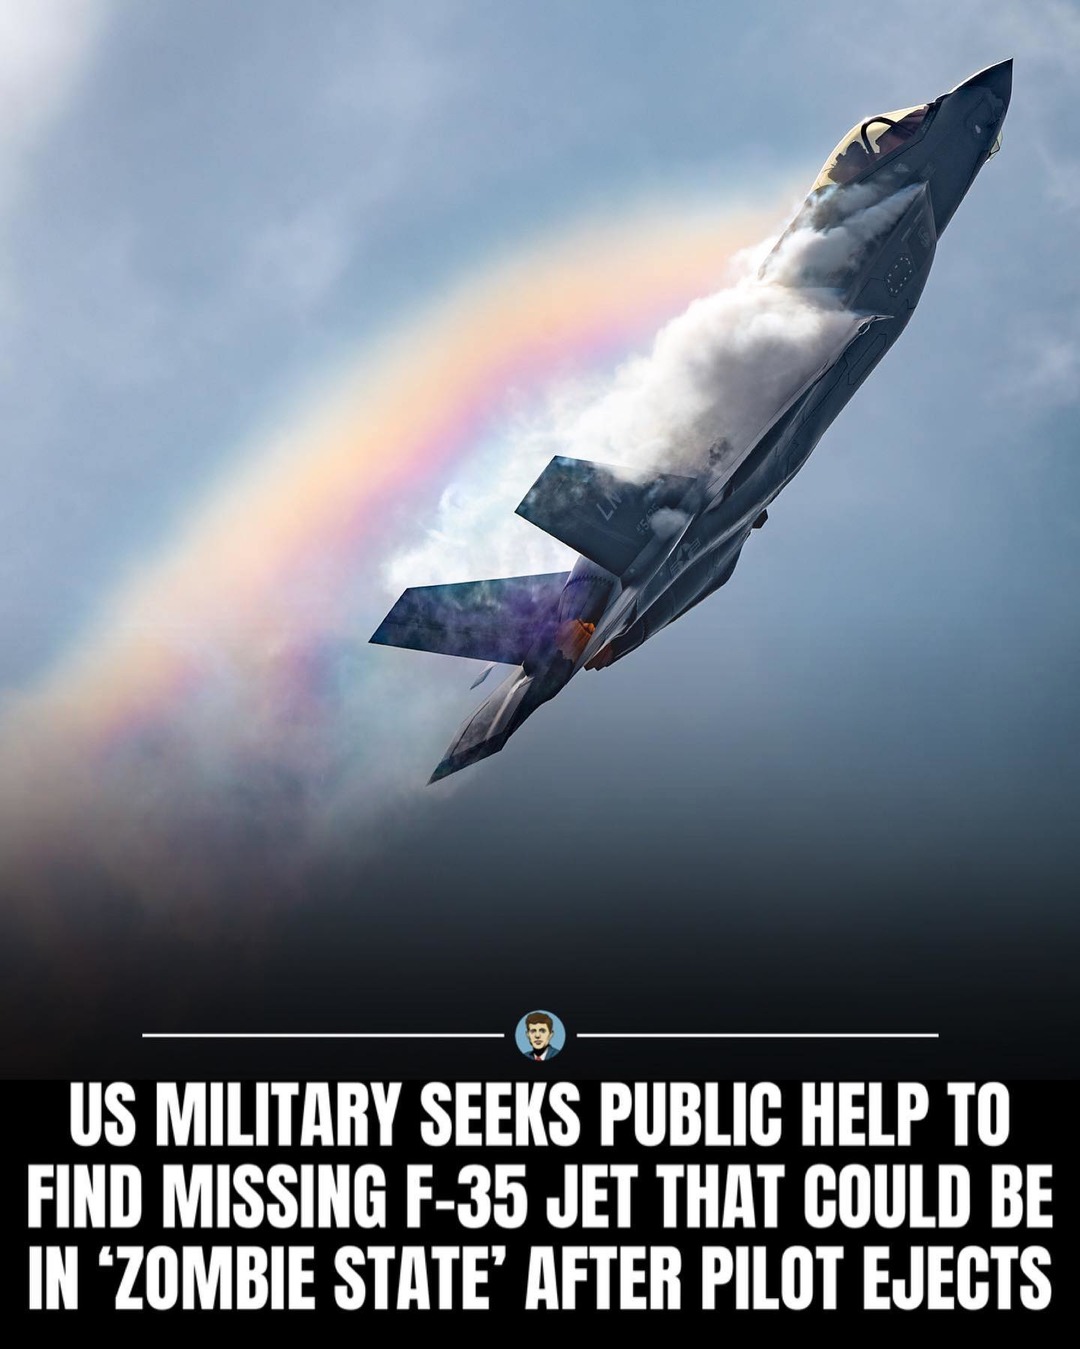 The US military has appealed for help from the public to find a $80 million F-35 fighter jet that went missing in #South Carolina and could still be flying in a “zombie state” after its pilot ejected - meme